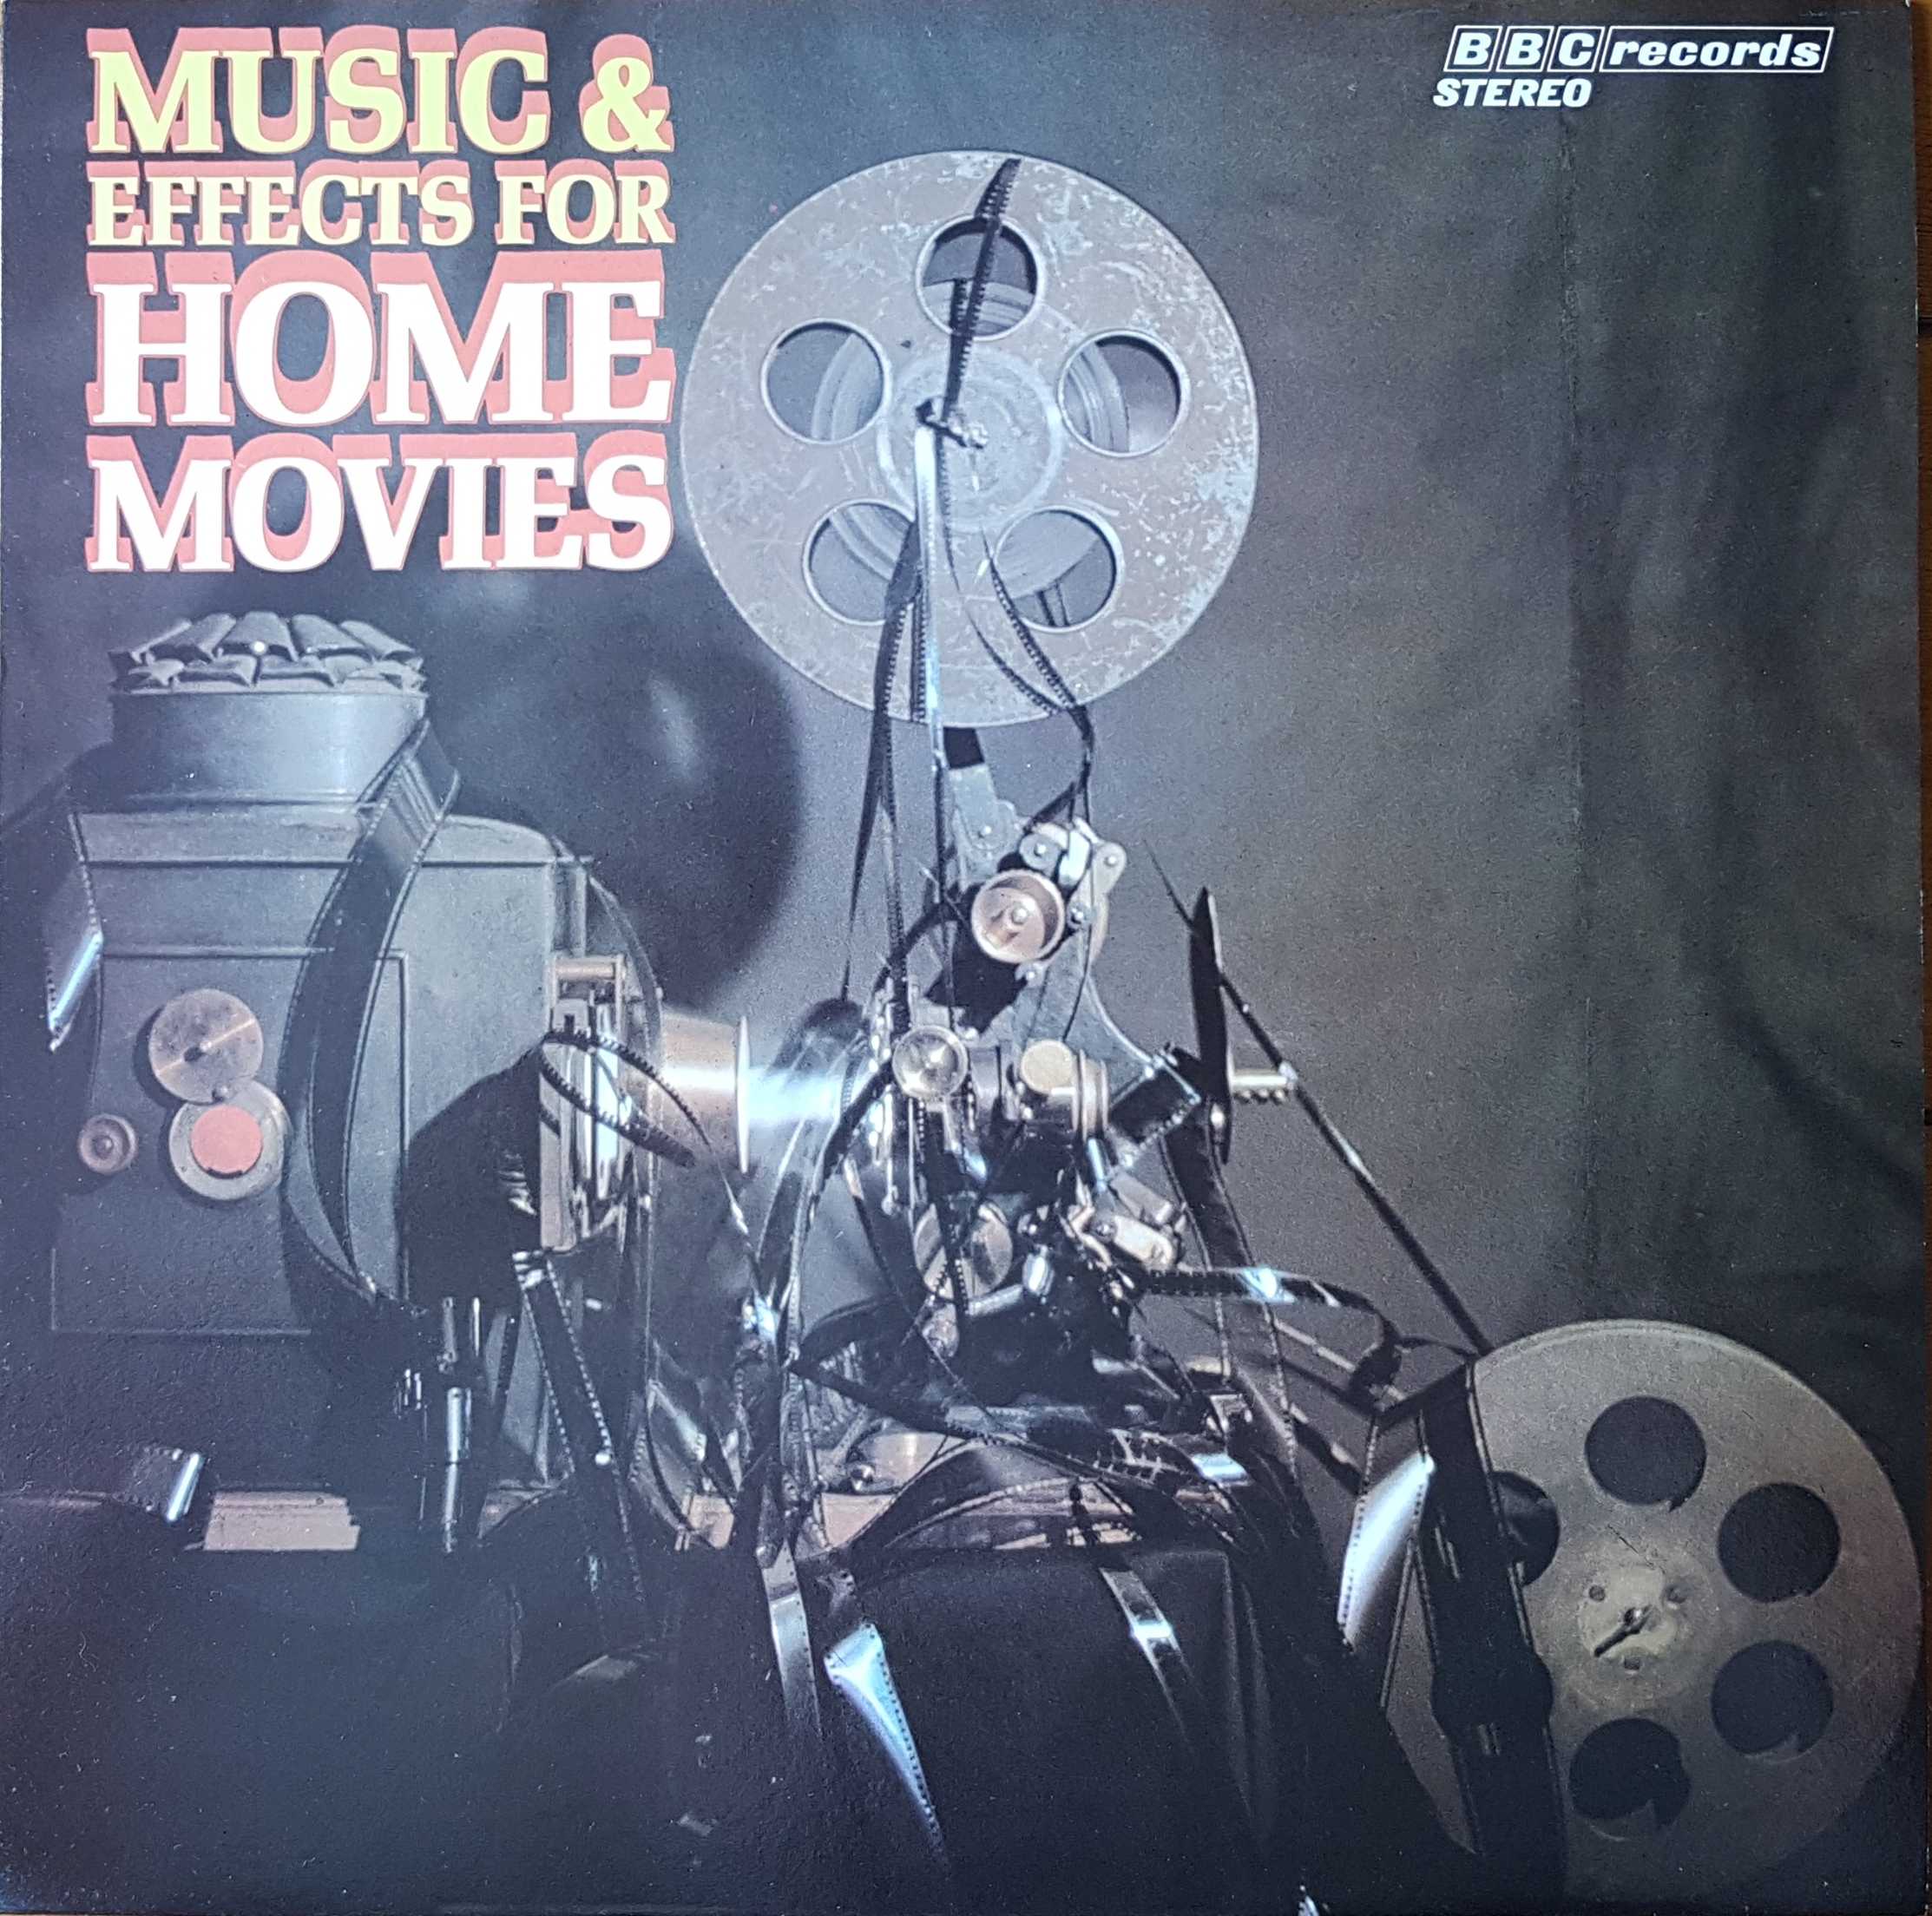 Picture of RED 120 Music and effects for home movies by artist Various from the BBC albums - Records and Tapes library